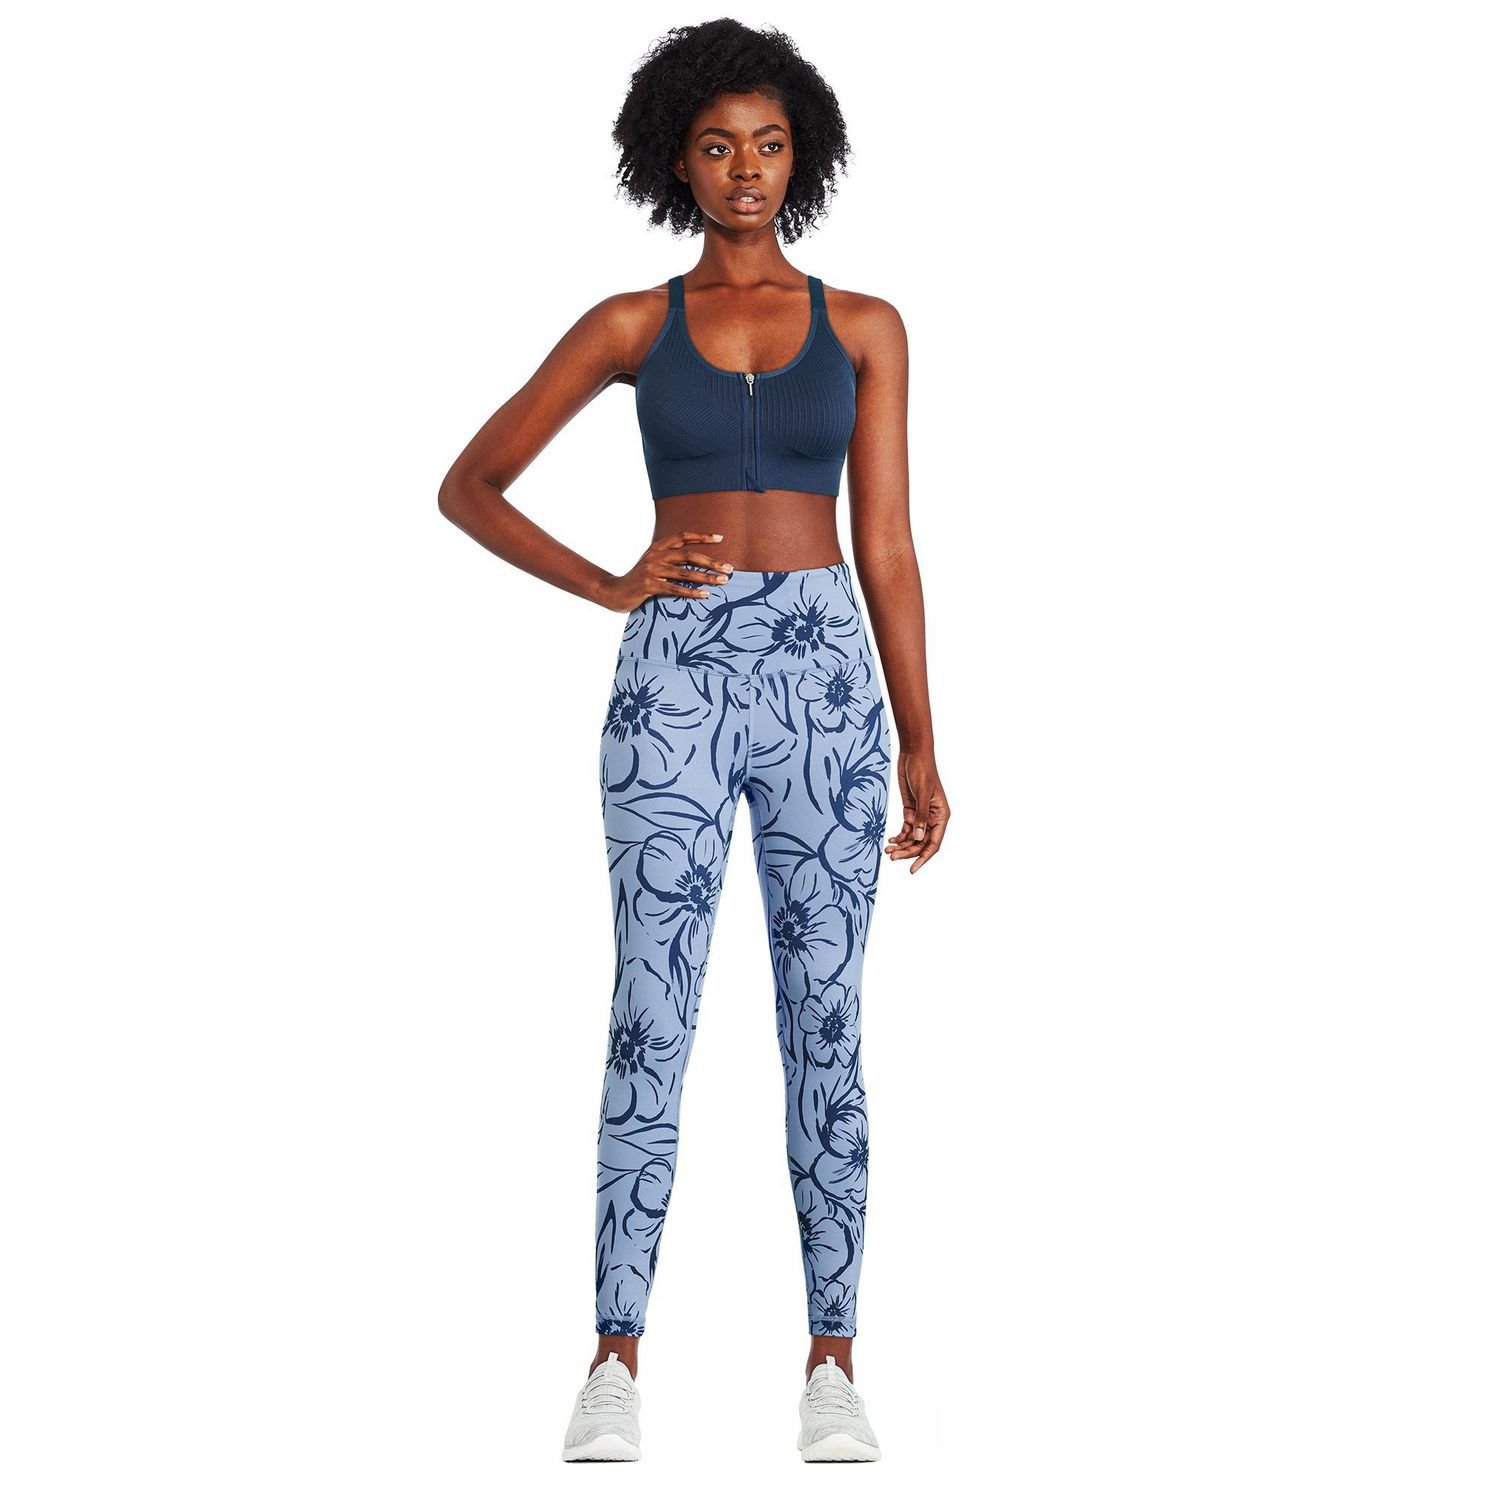 Athletic Works Women's Hybrid Woven Pant | Walmart Canada | Athletic works,  Athletic women, Athleisure trend